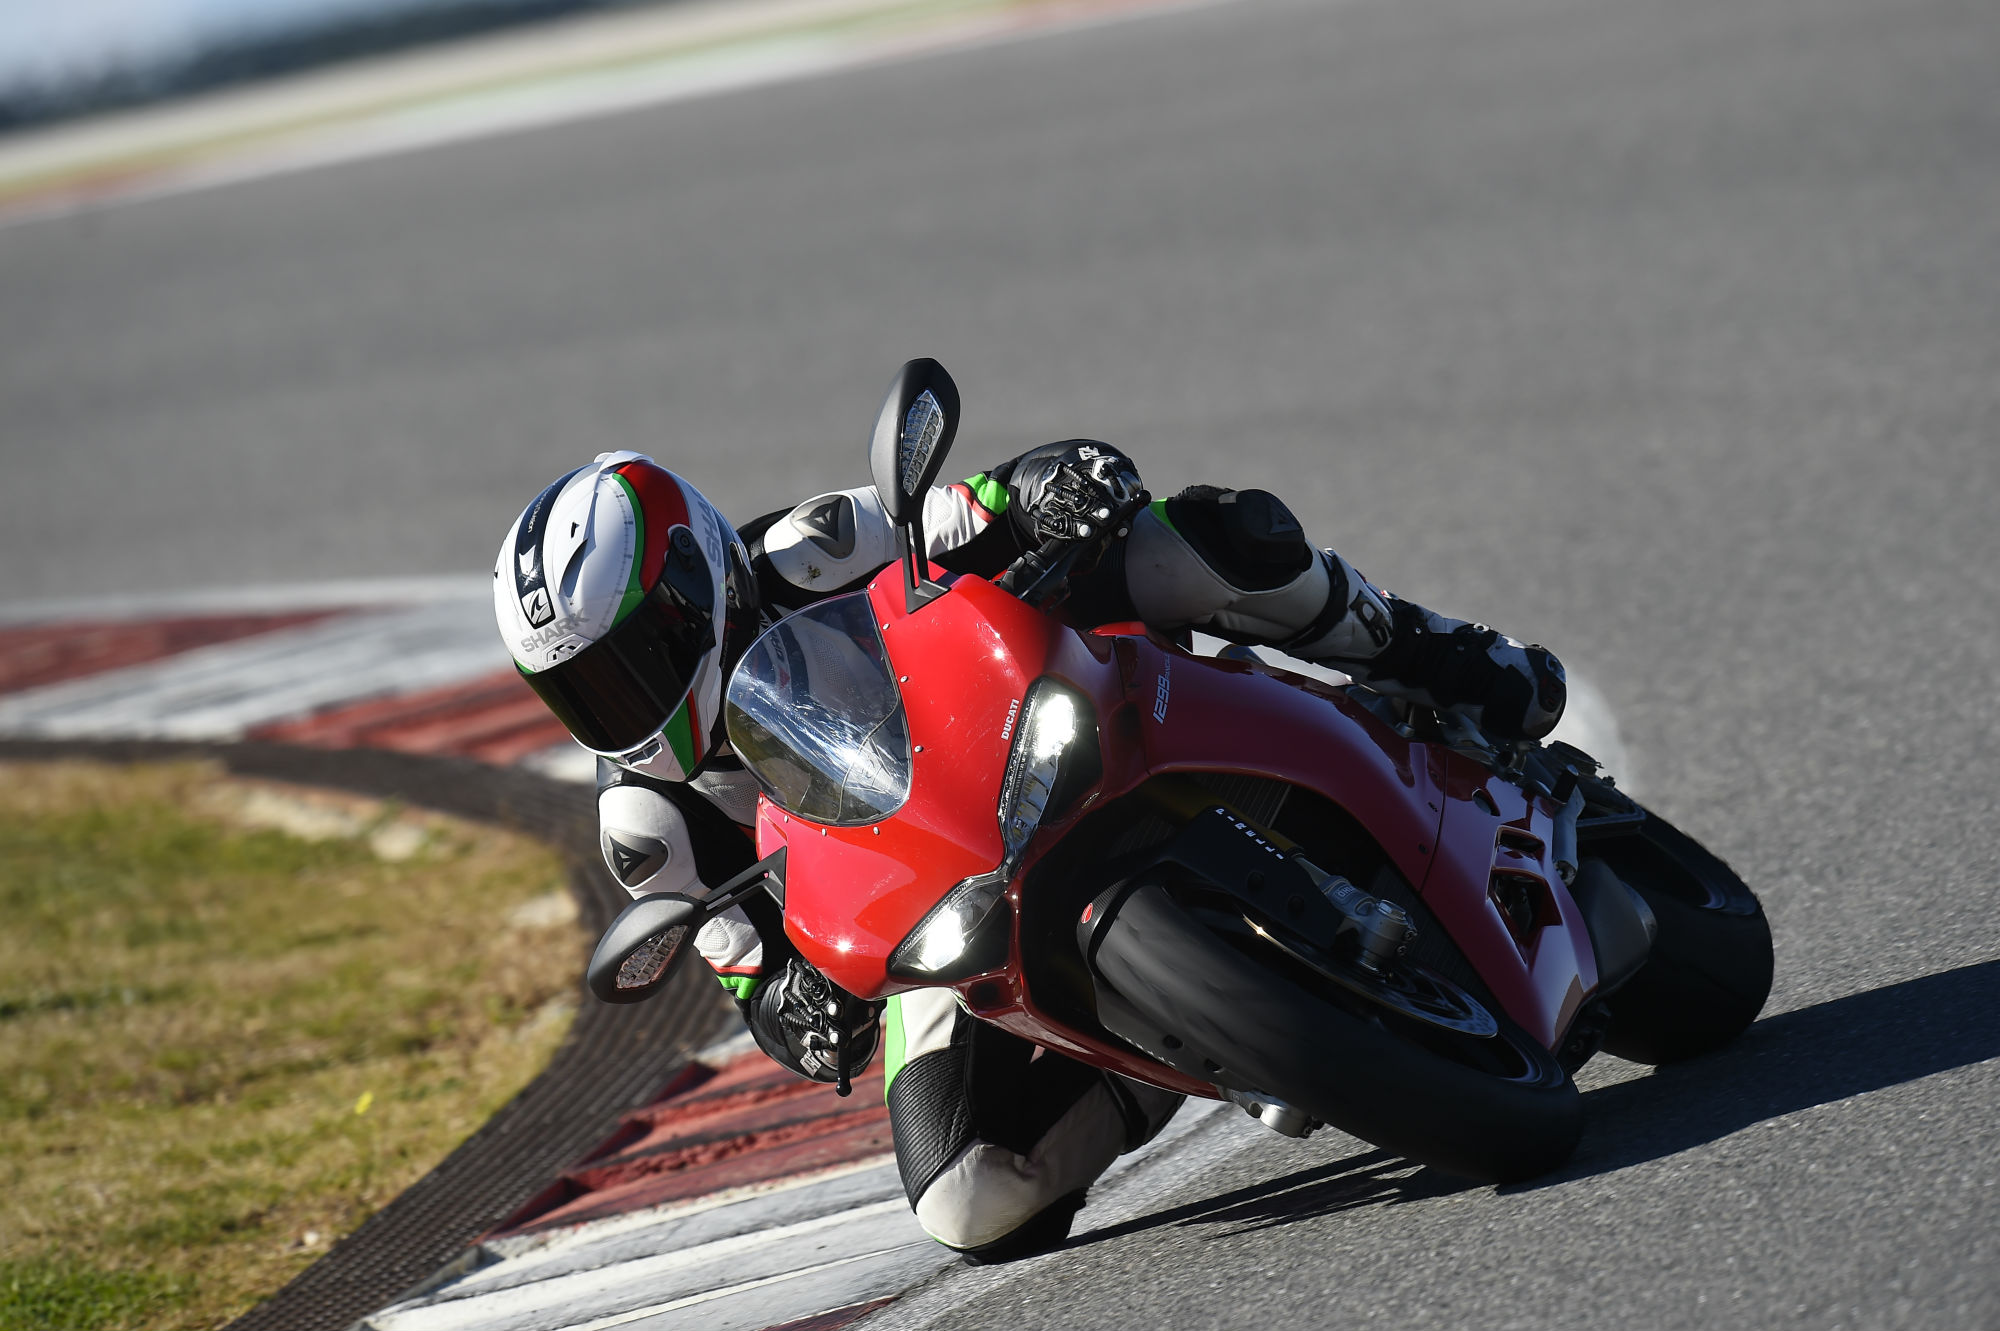 Want to be a Ducati test rider?